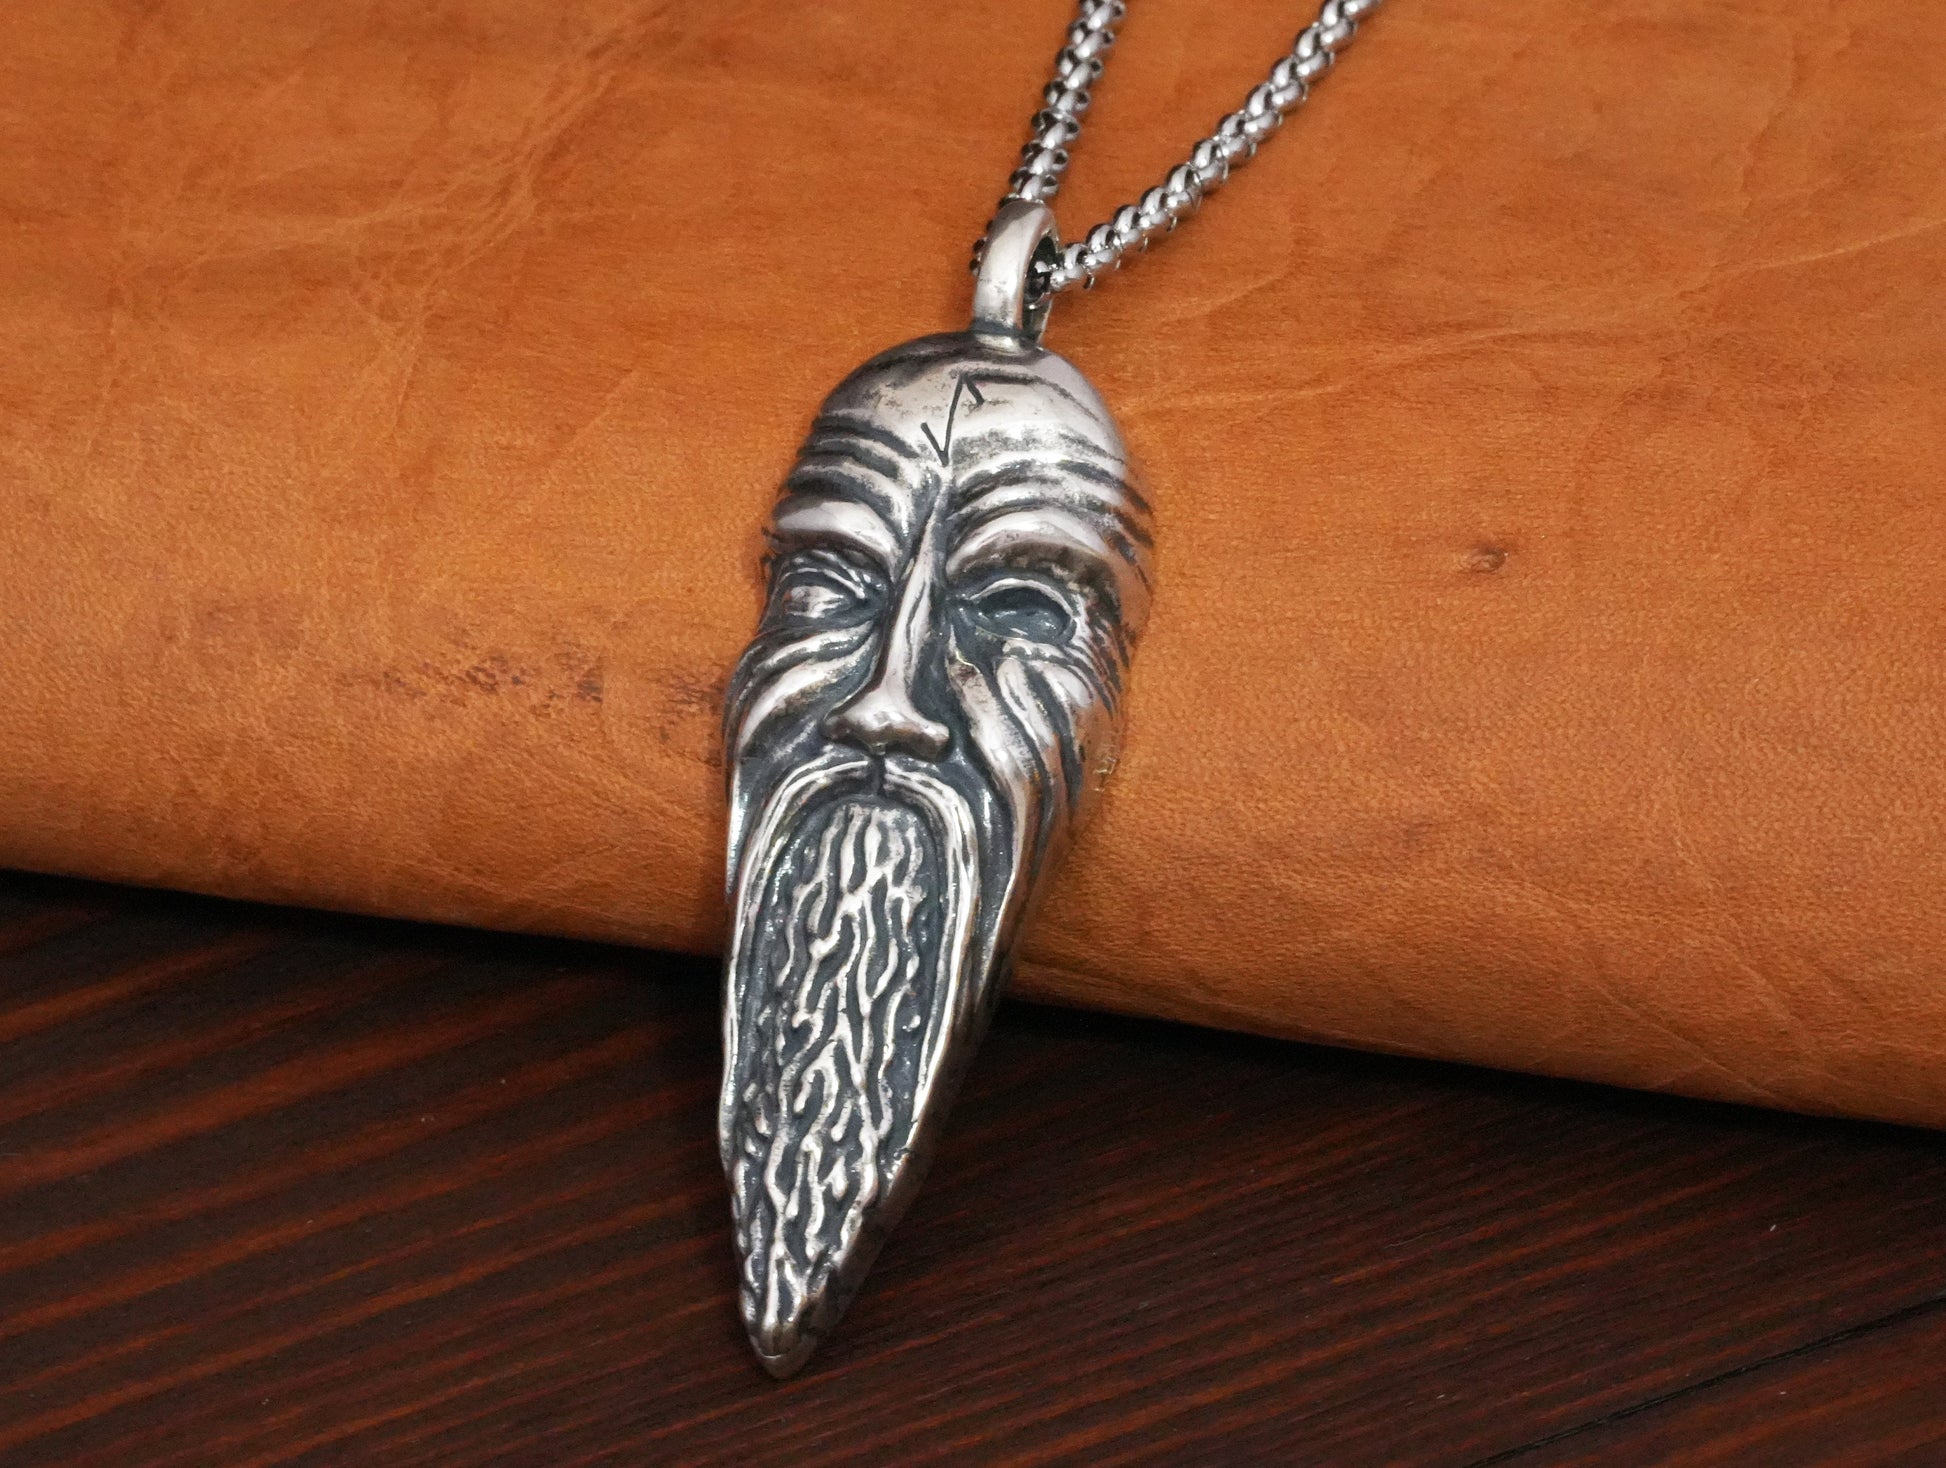 Odin Carved Statue For Altar and Praying For Norns For Good Luck - Baldur Jewelry